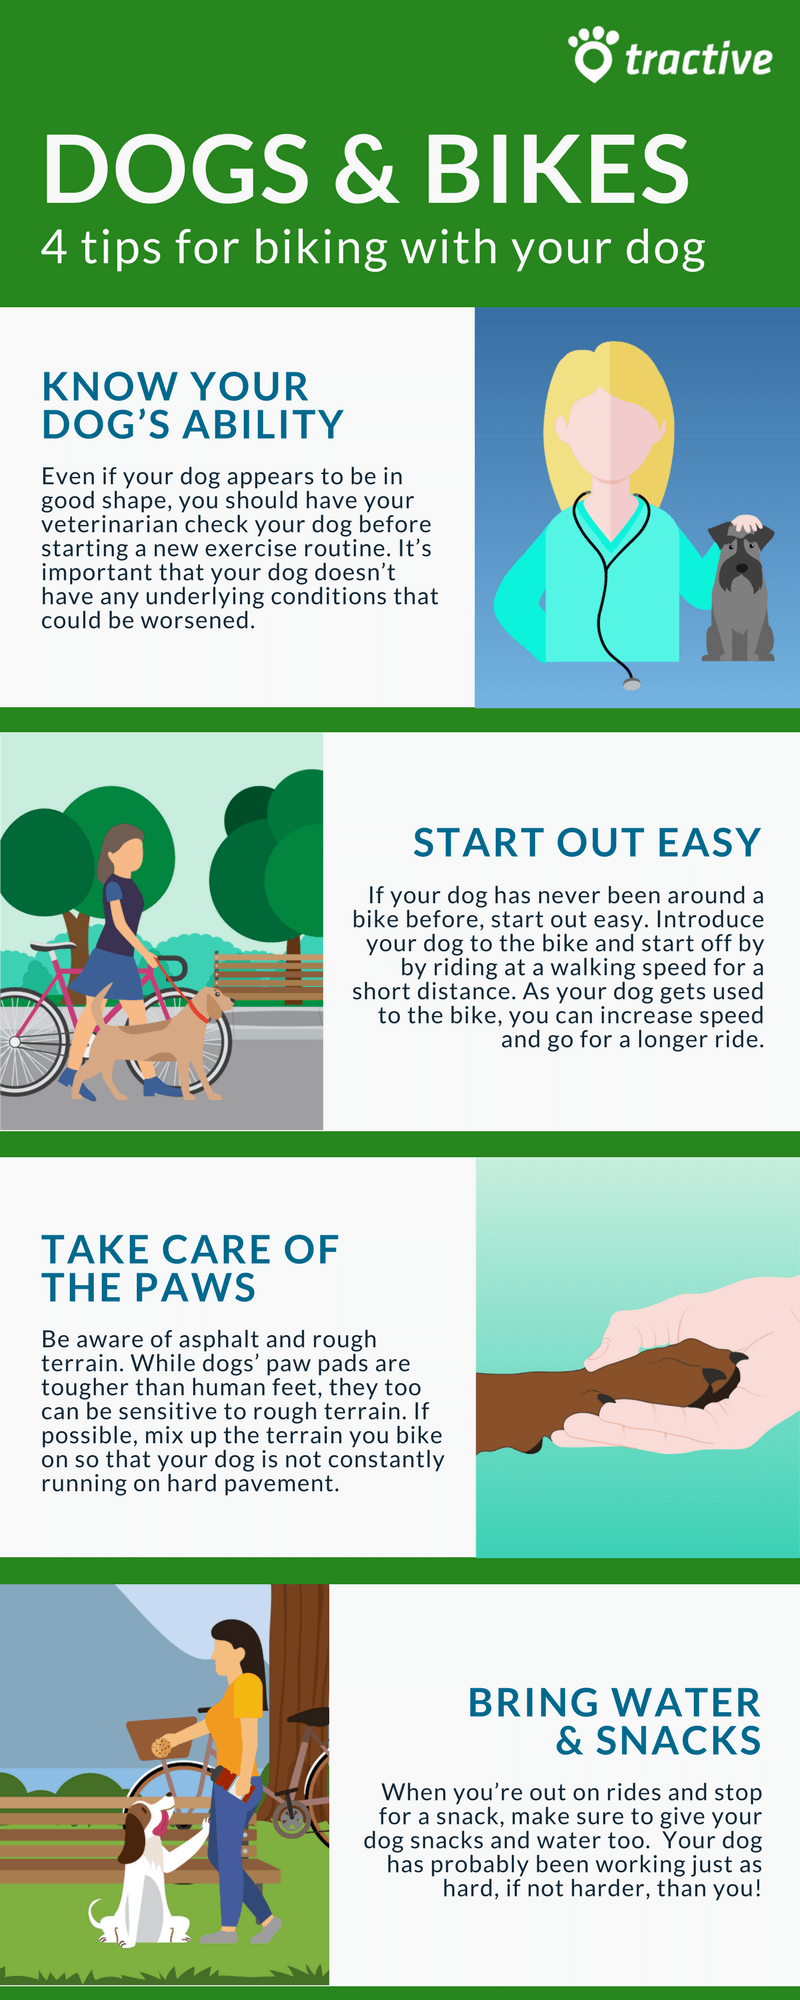 biking with dog tips summarized in infographic